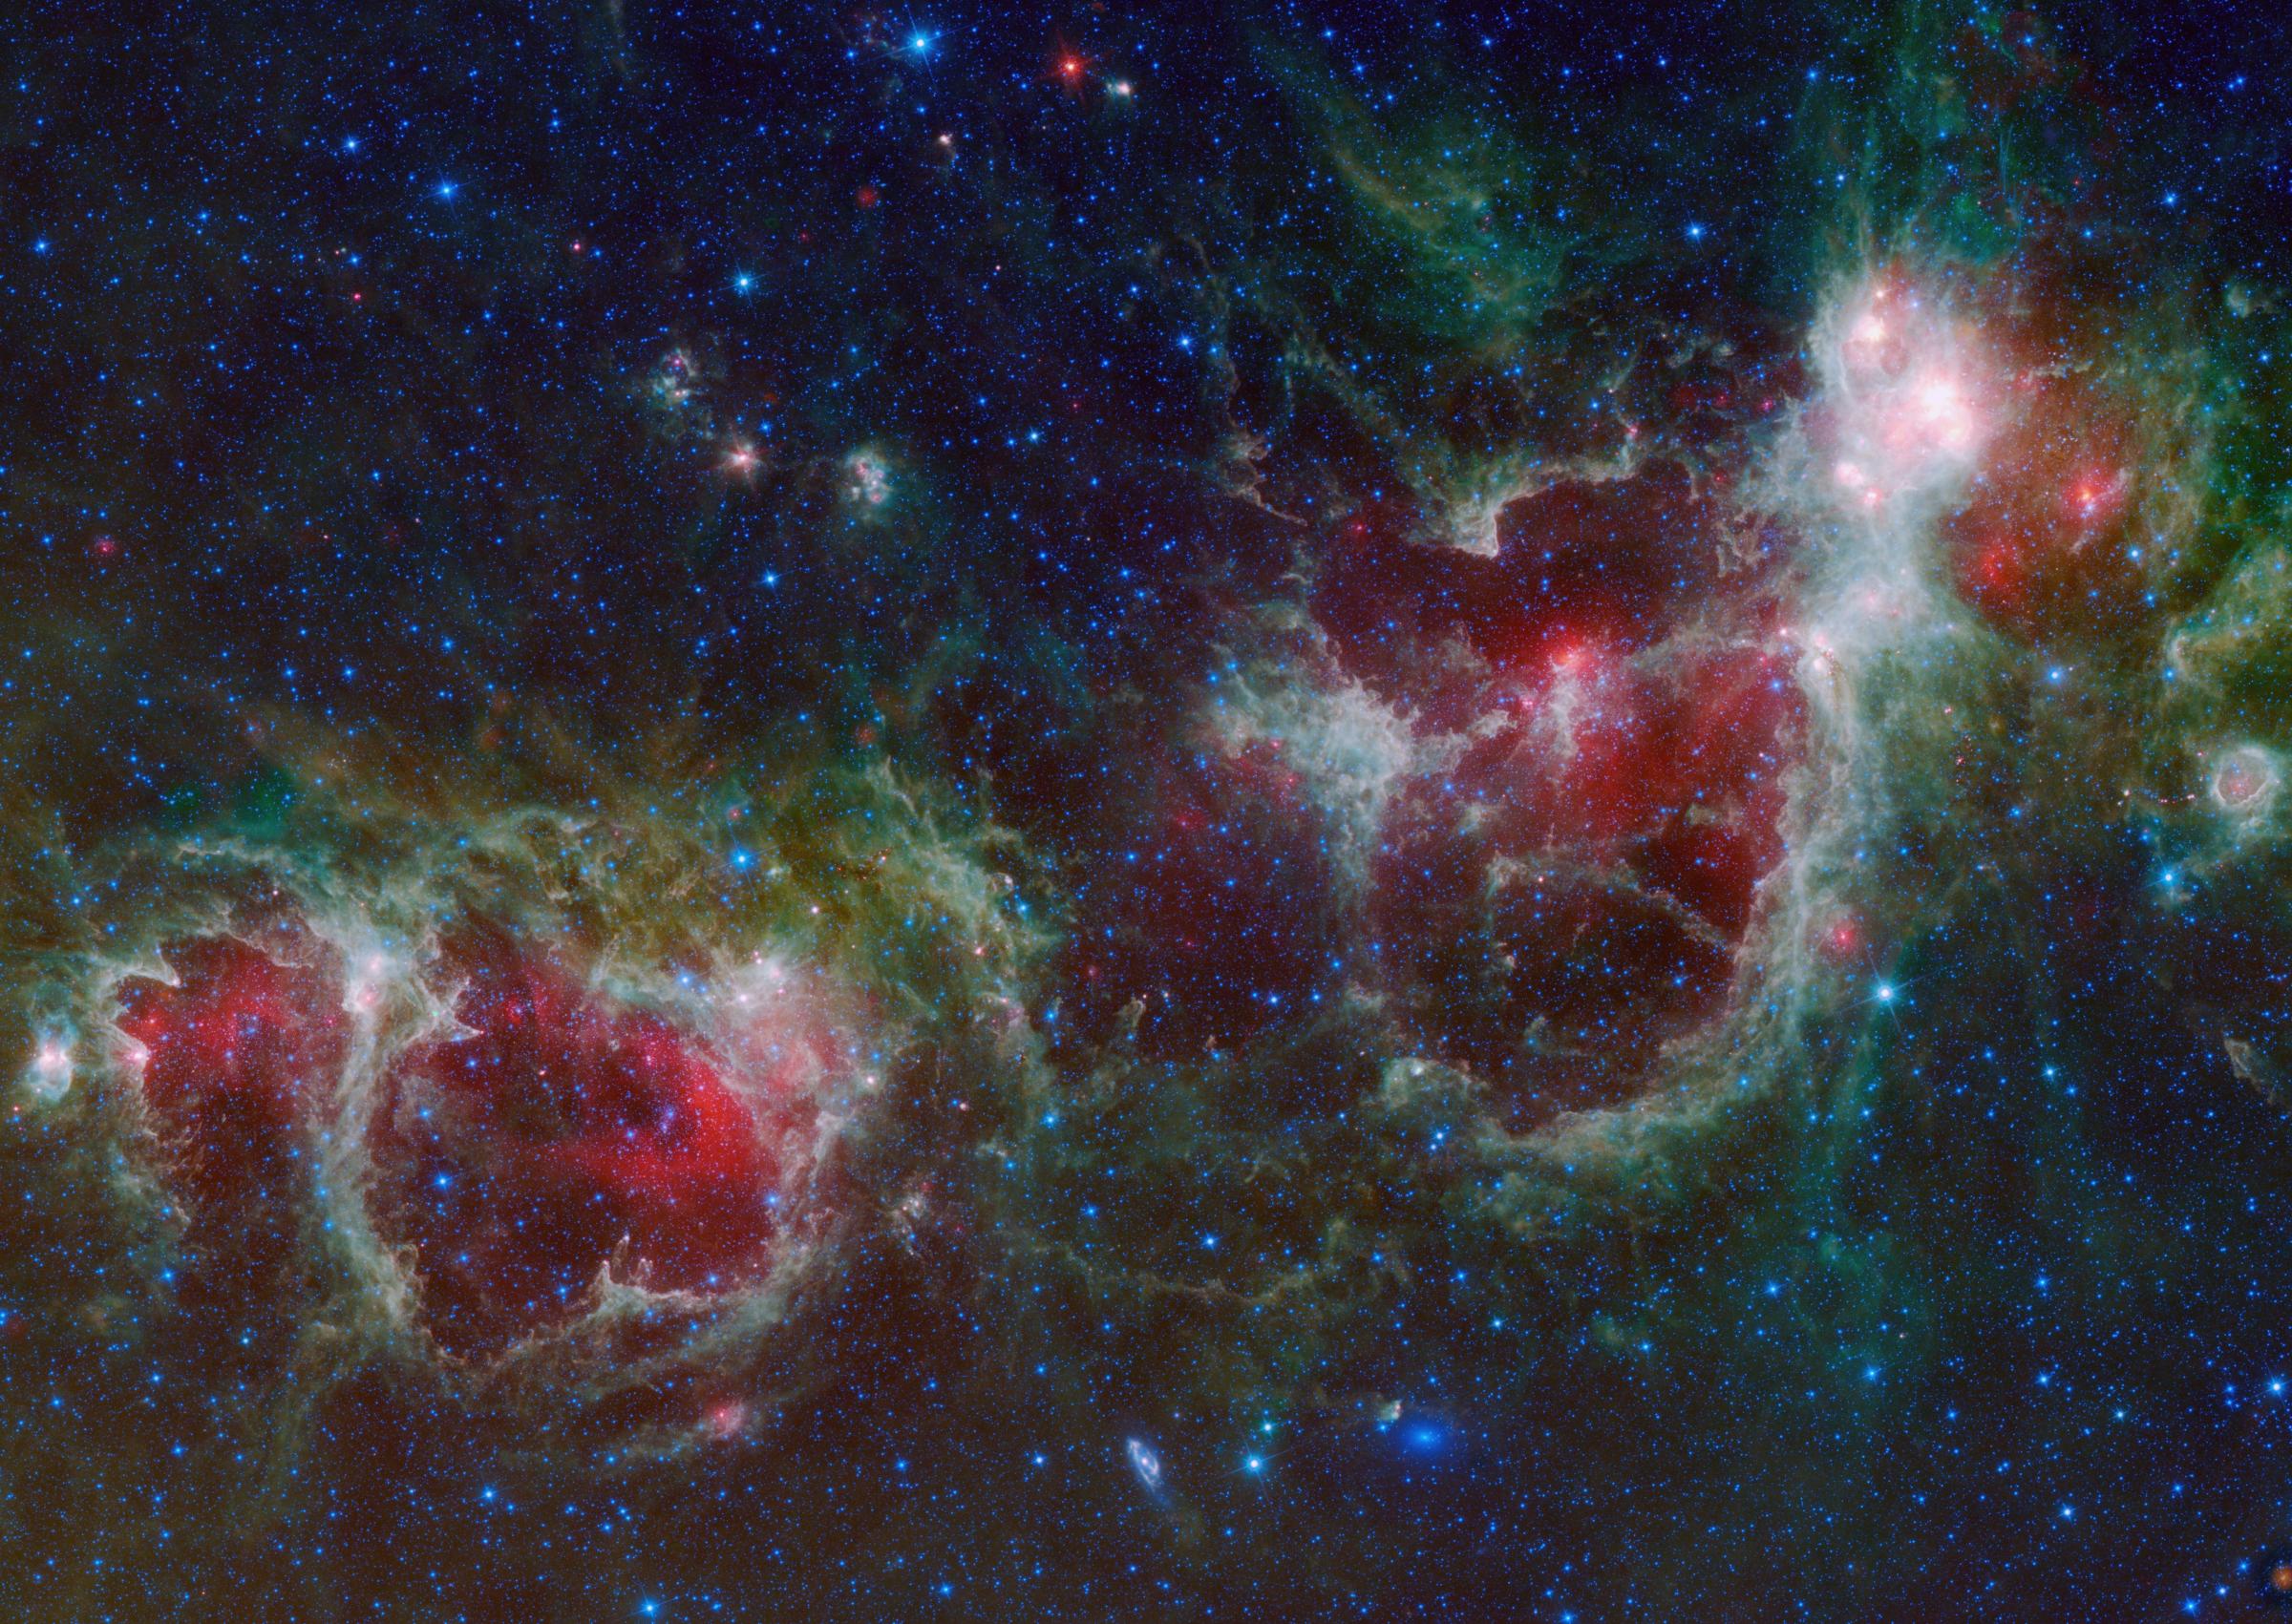 The Heart and Soul nebulae are seen in this infrared mosaic from NASA's WISE. Located in the constellation Cassiopeia, about 6,000 light-years from Earth, the Heart and Soul nebulae form a vast star-forming complex that makes up part of the Perseus spiral arm of our Milky Way galaxy. The nebula to the right is the Heart, and to the left is the Soul nebula.